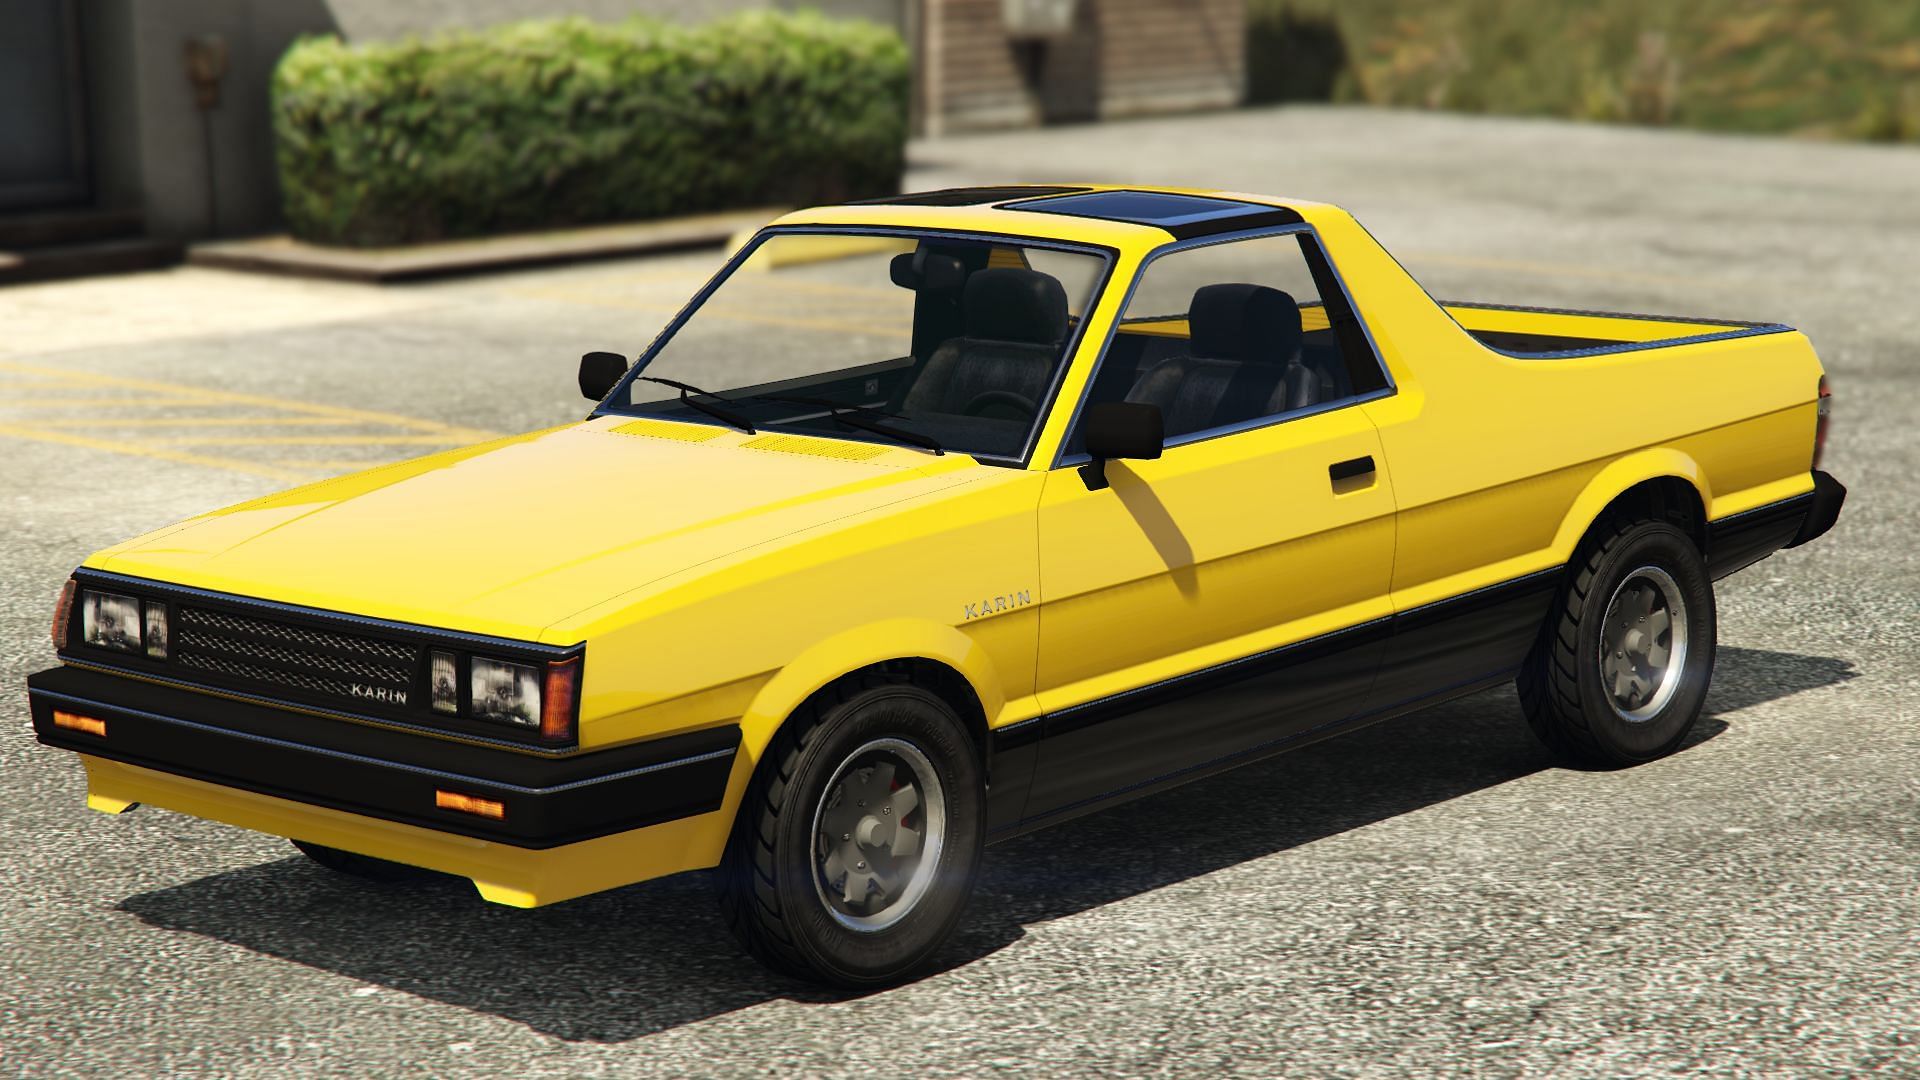 The Karin Boor is the last unreleased car to discuss(Image via Rockstar Games)